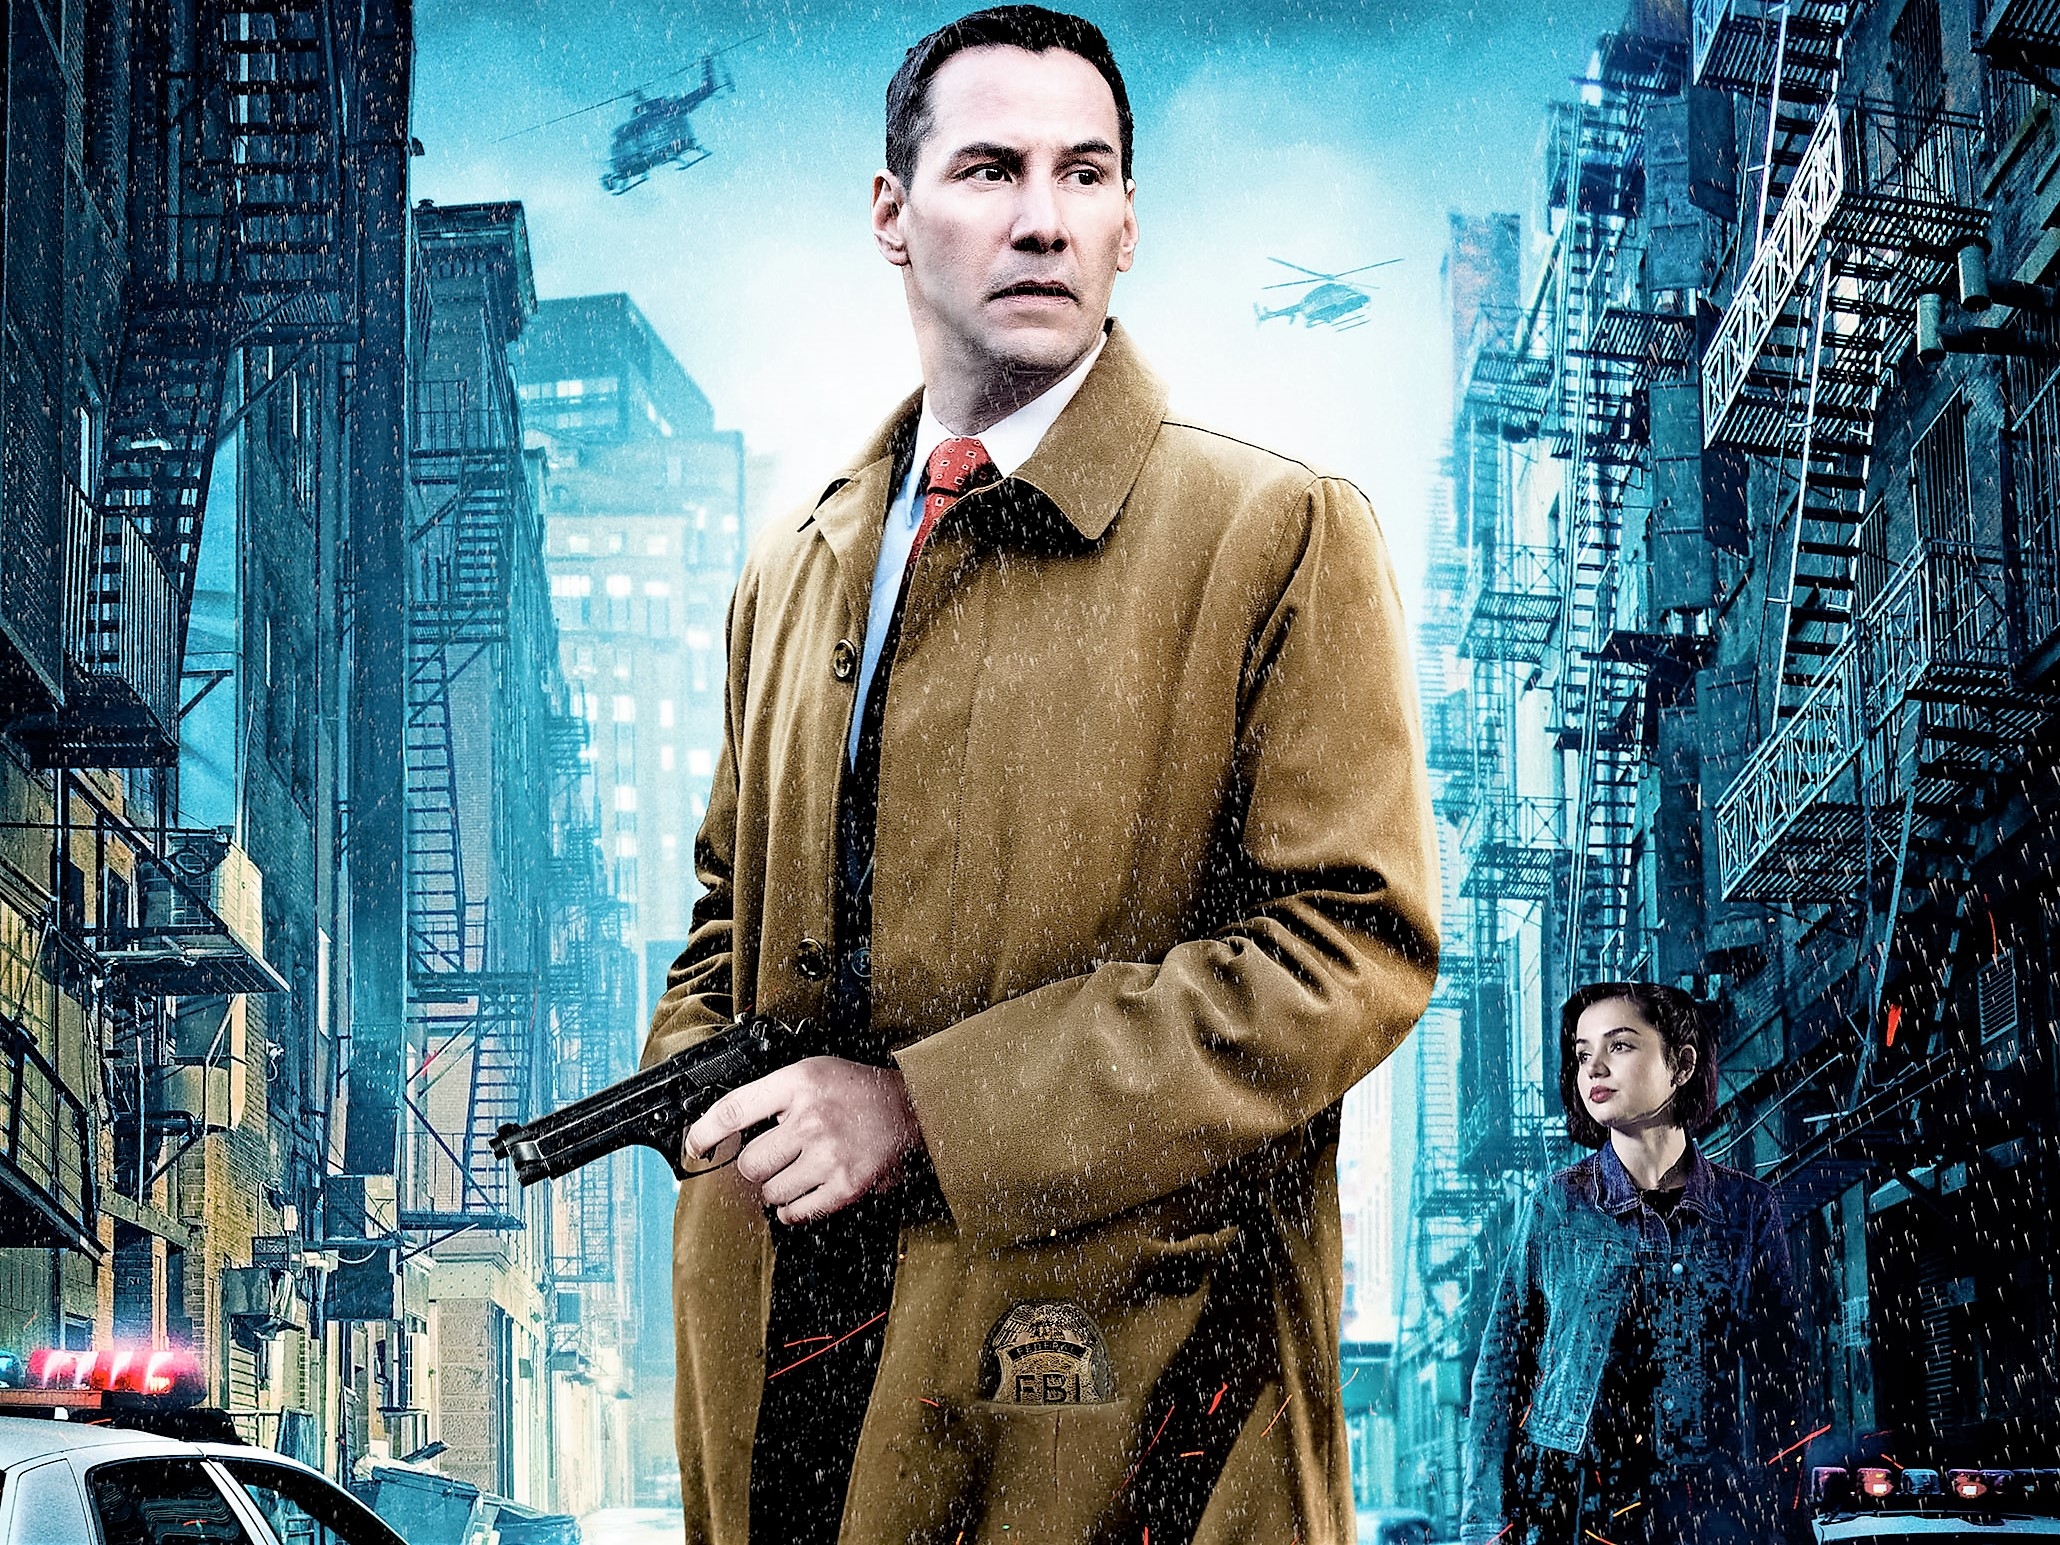 Keanu Reeves on the cover of the movie